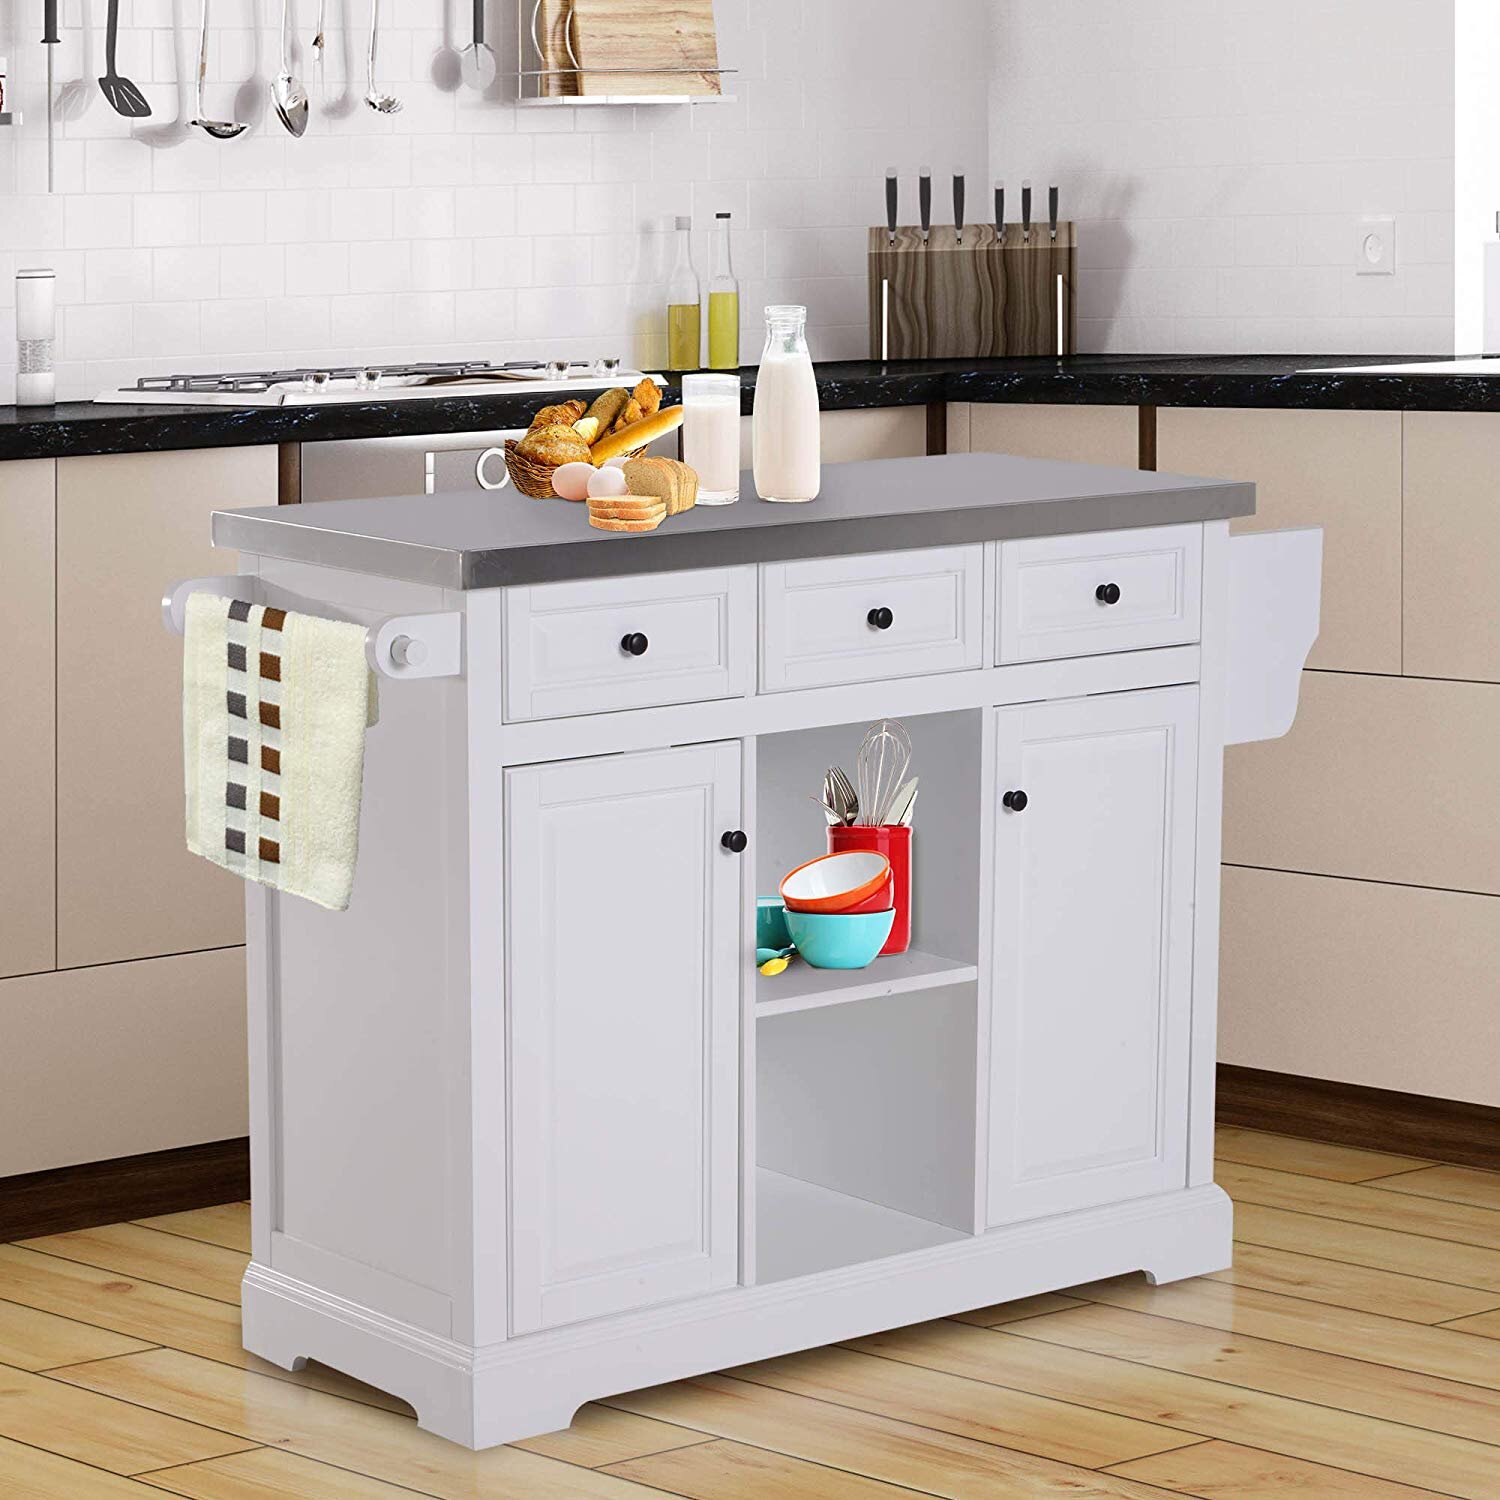 Kitchen Islands Carts On Sale You Ll Love In 2021 Wayfair